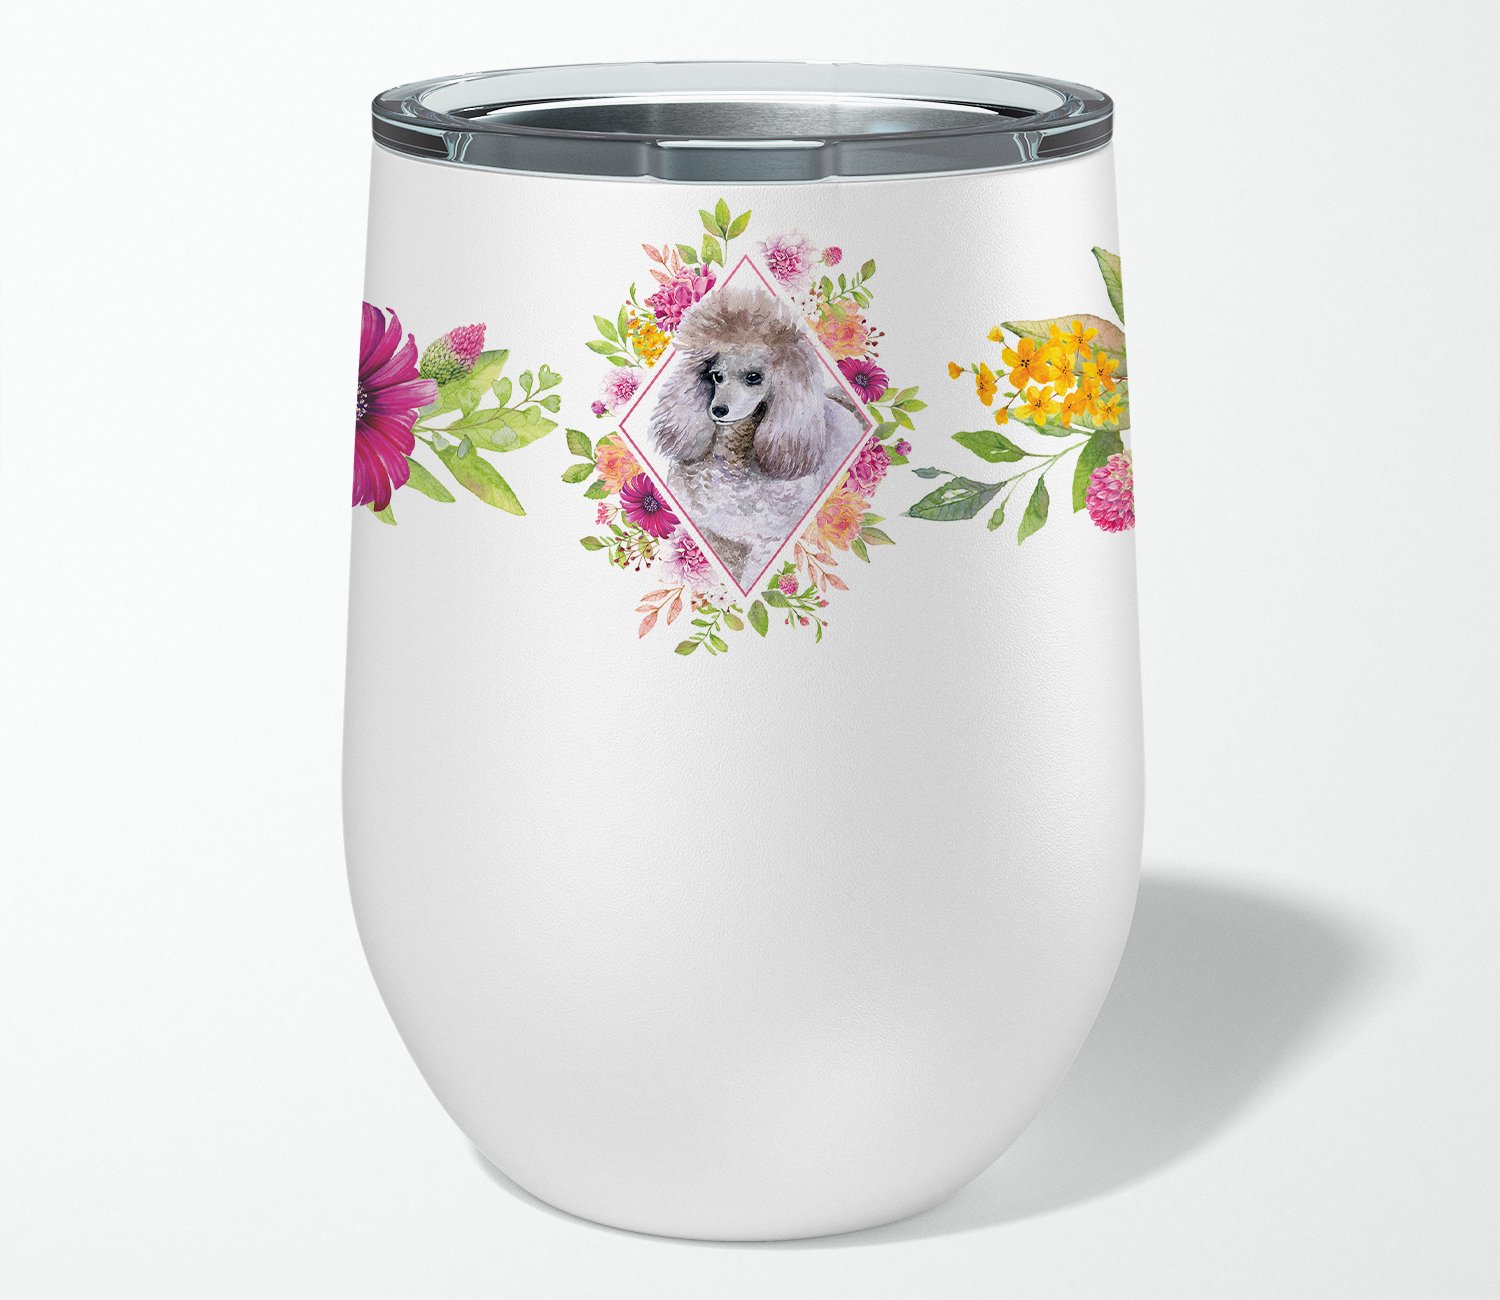 Standard Grey Poodle Pink Flowers Stainless Steel 12 oz Stemless Wine Glass CK4173TBL12 by Caroline's Treasures